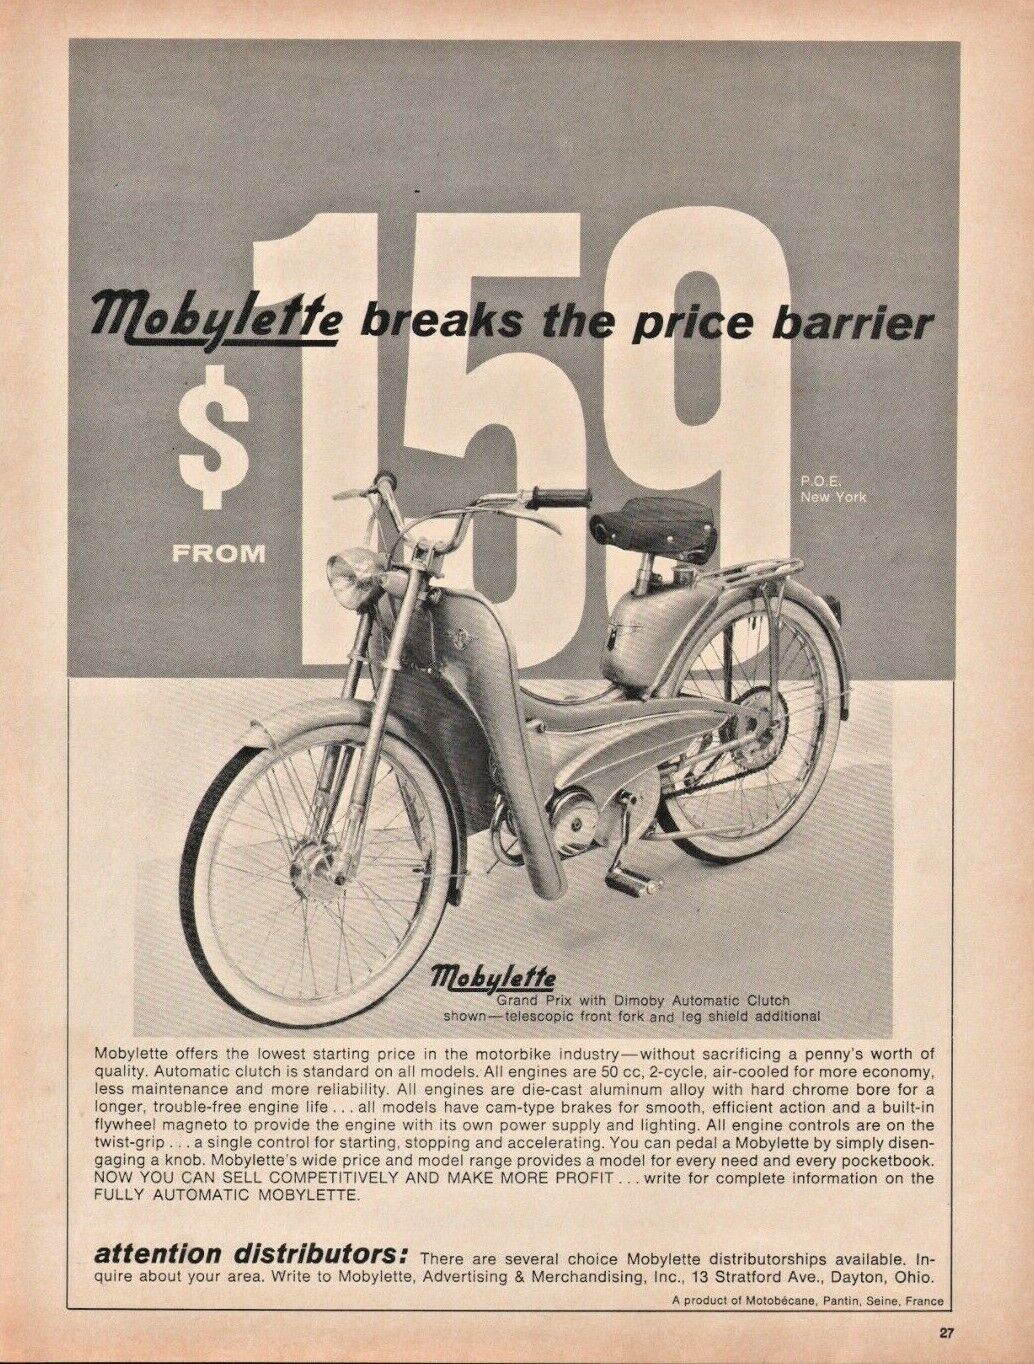 1965 Mobylette Grand Prix With Dimoby Automatic Clutch - Vintage Motorcycle Ad